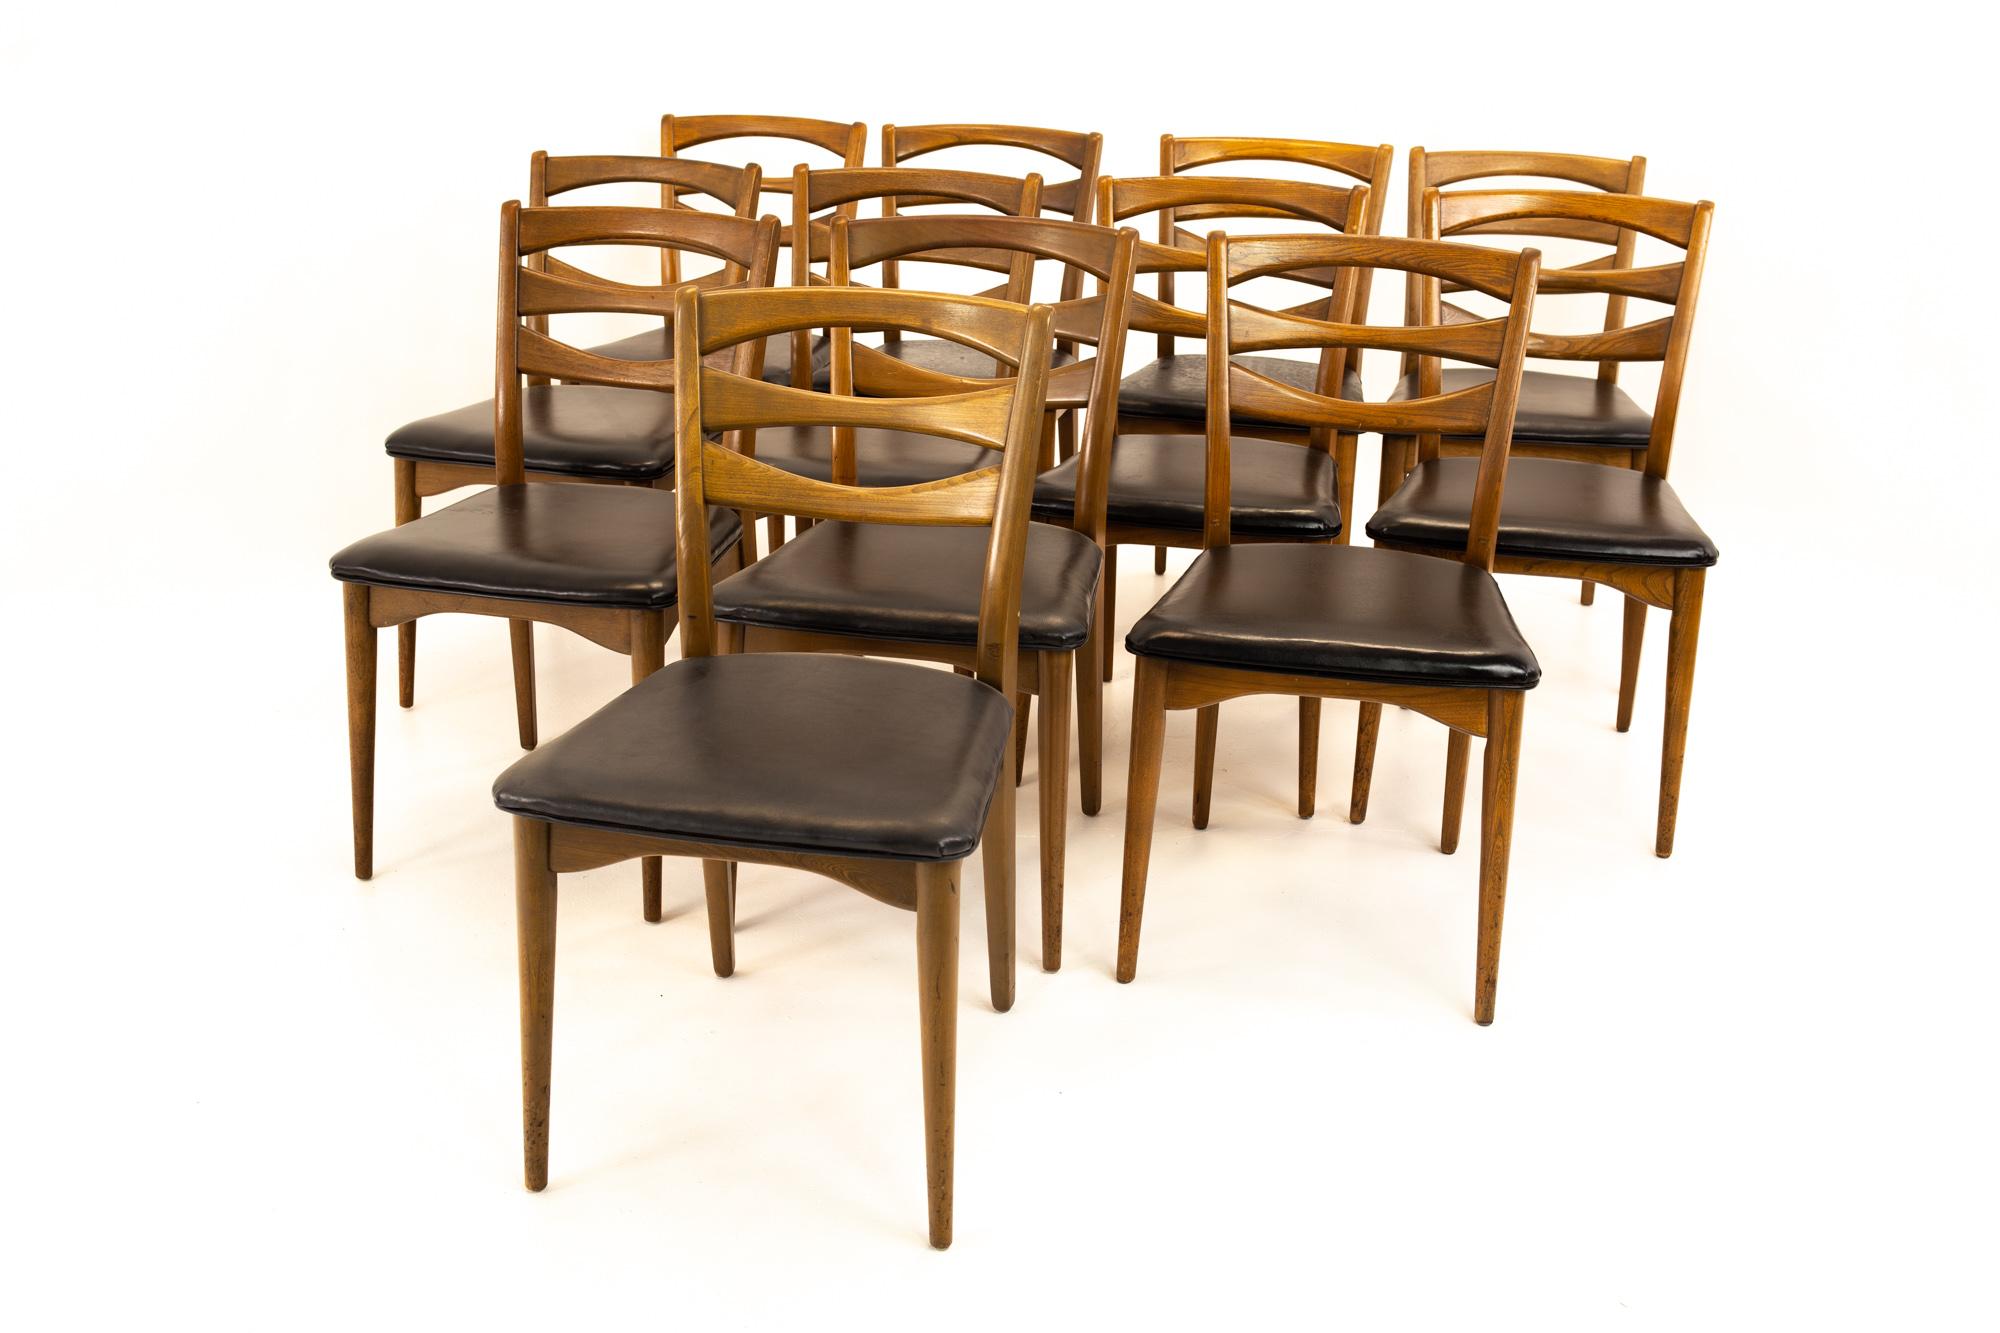 Lawrence Peabody for Nemschoff Model 300 mid century walnut dining chairs - set of 12.
Each chair measures: 18.75 wide x 21 deep x 32.25 high, with a seat height of 17.75 inches


All pieces of furniture can be had in what we call restored